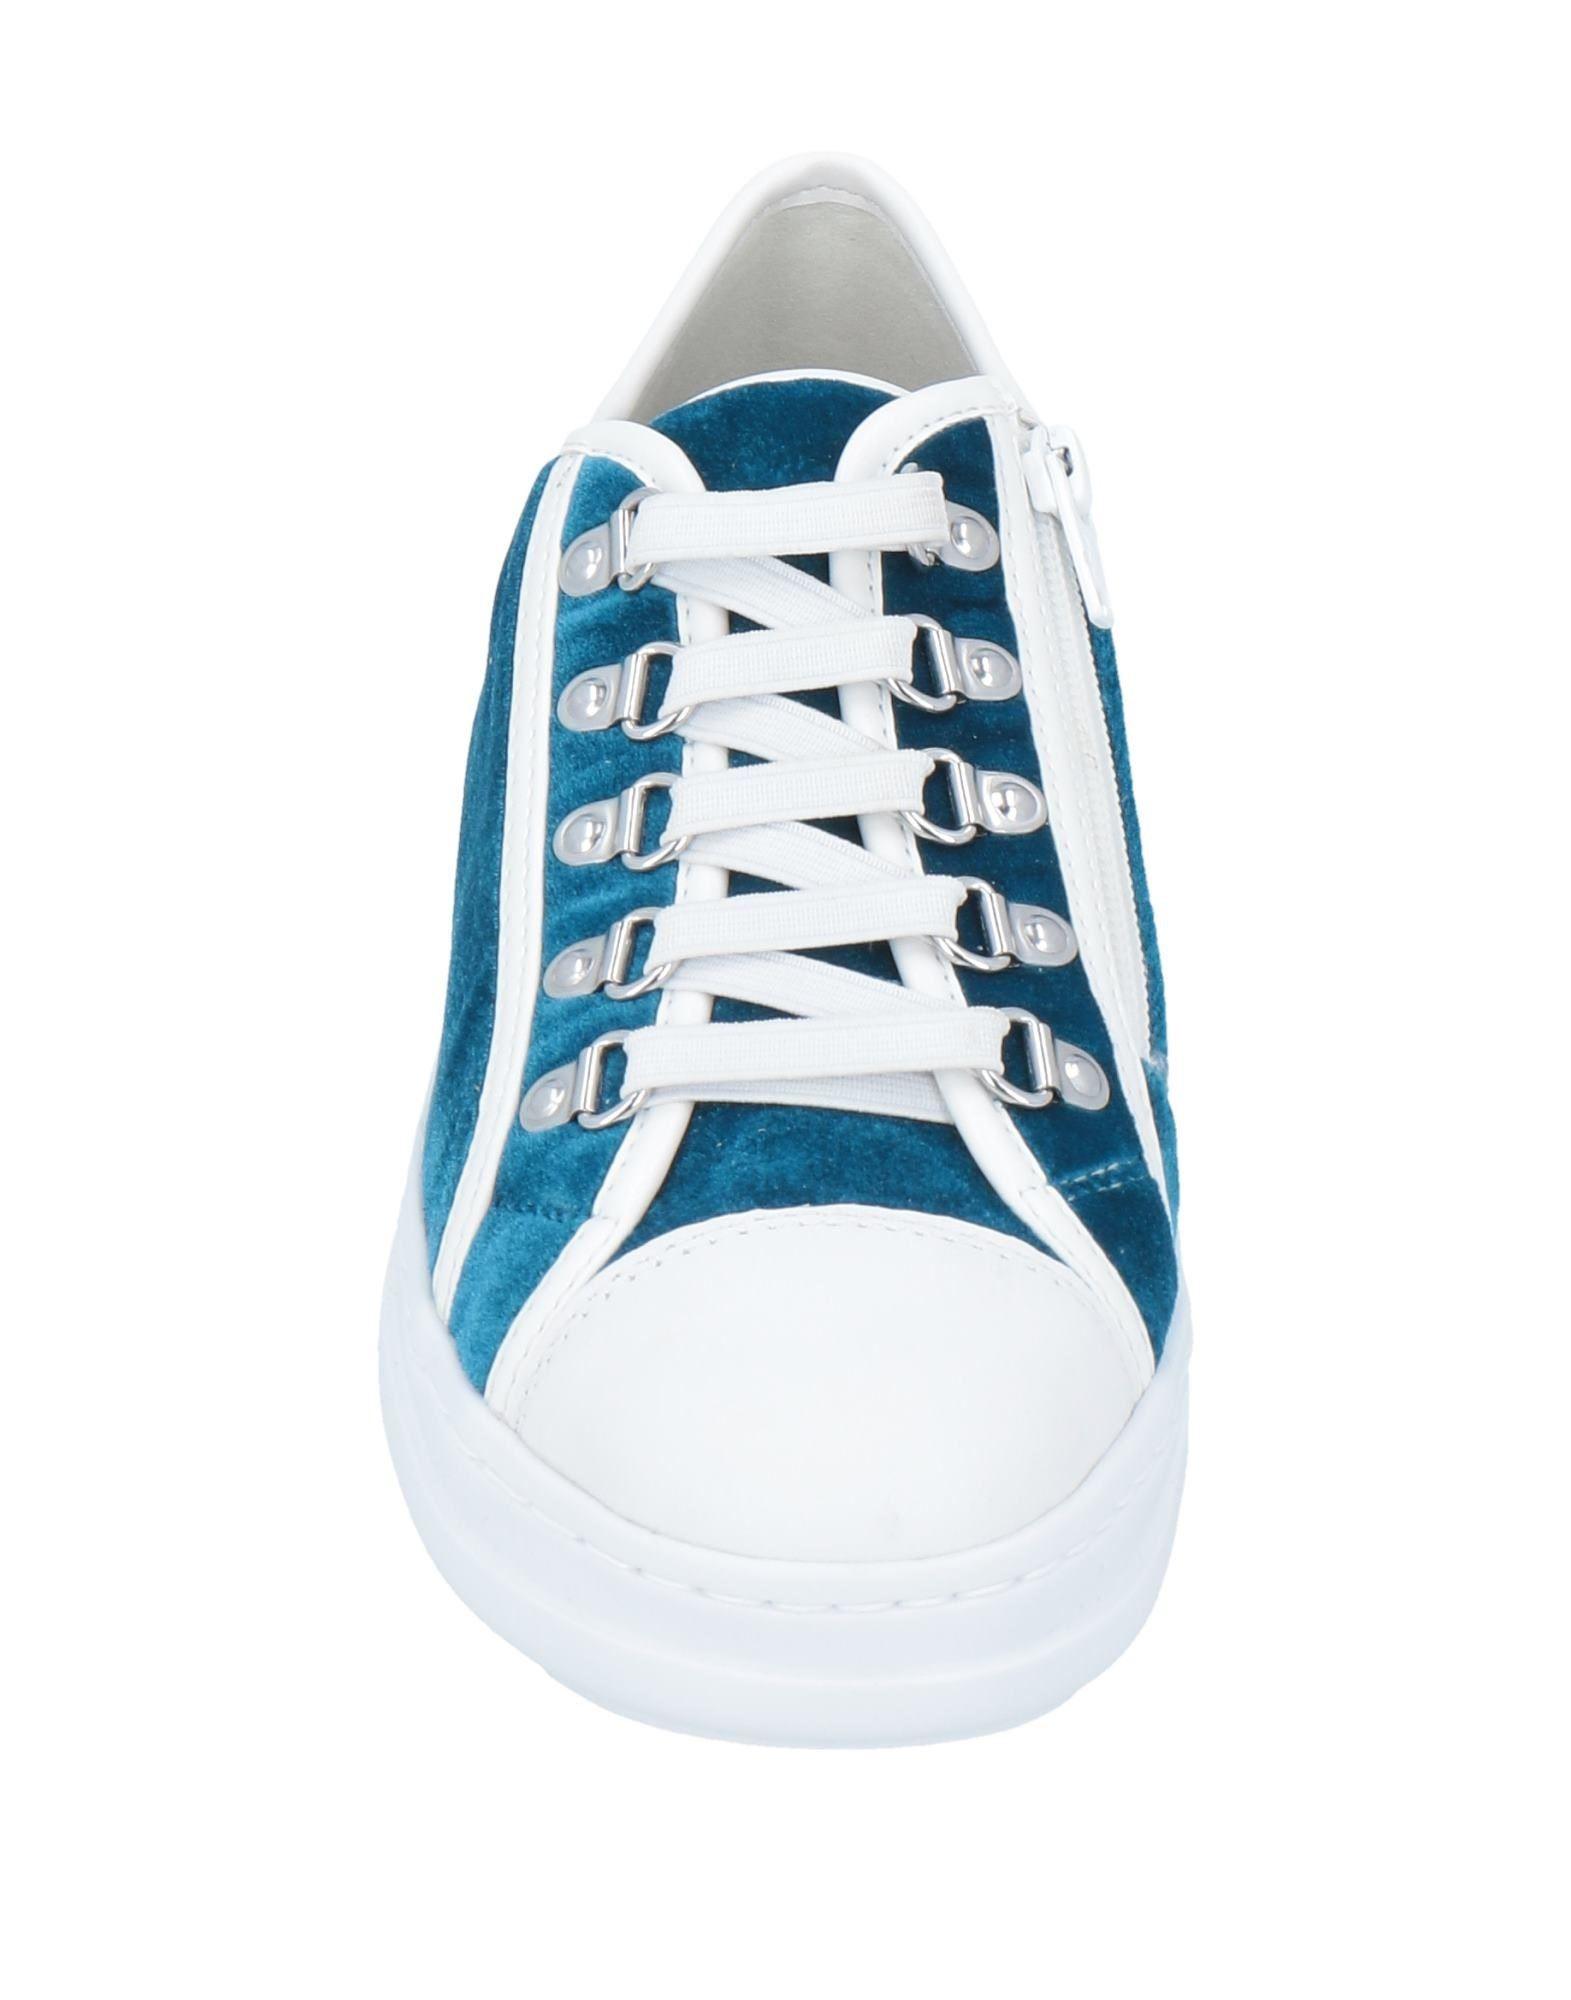 Geox Velvet Trainers in Turquoise (Blue) | Lyst